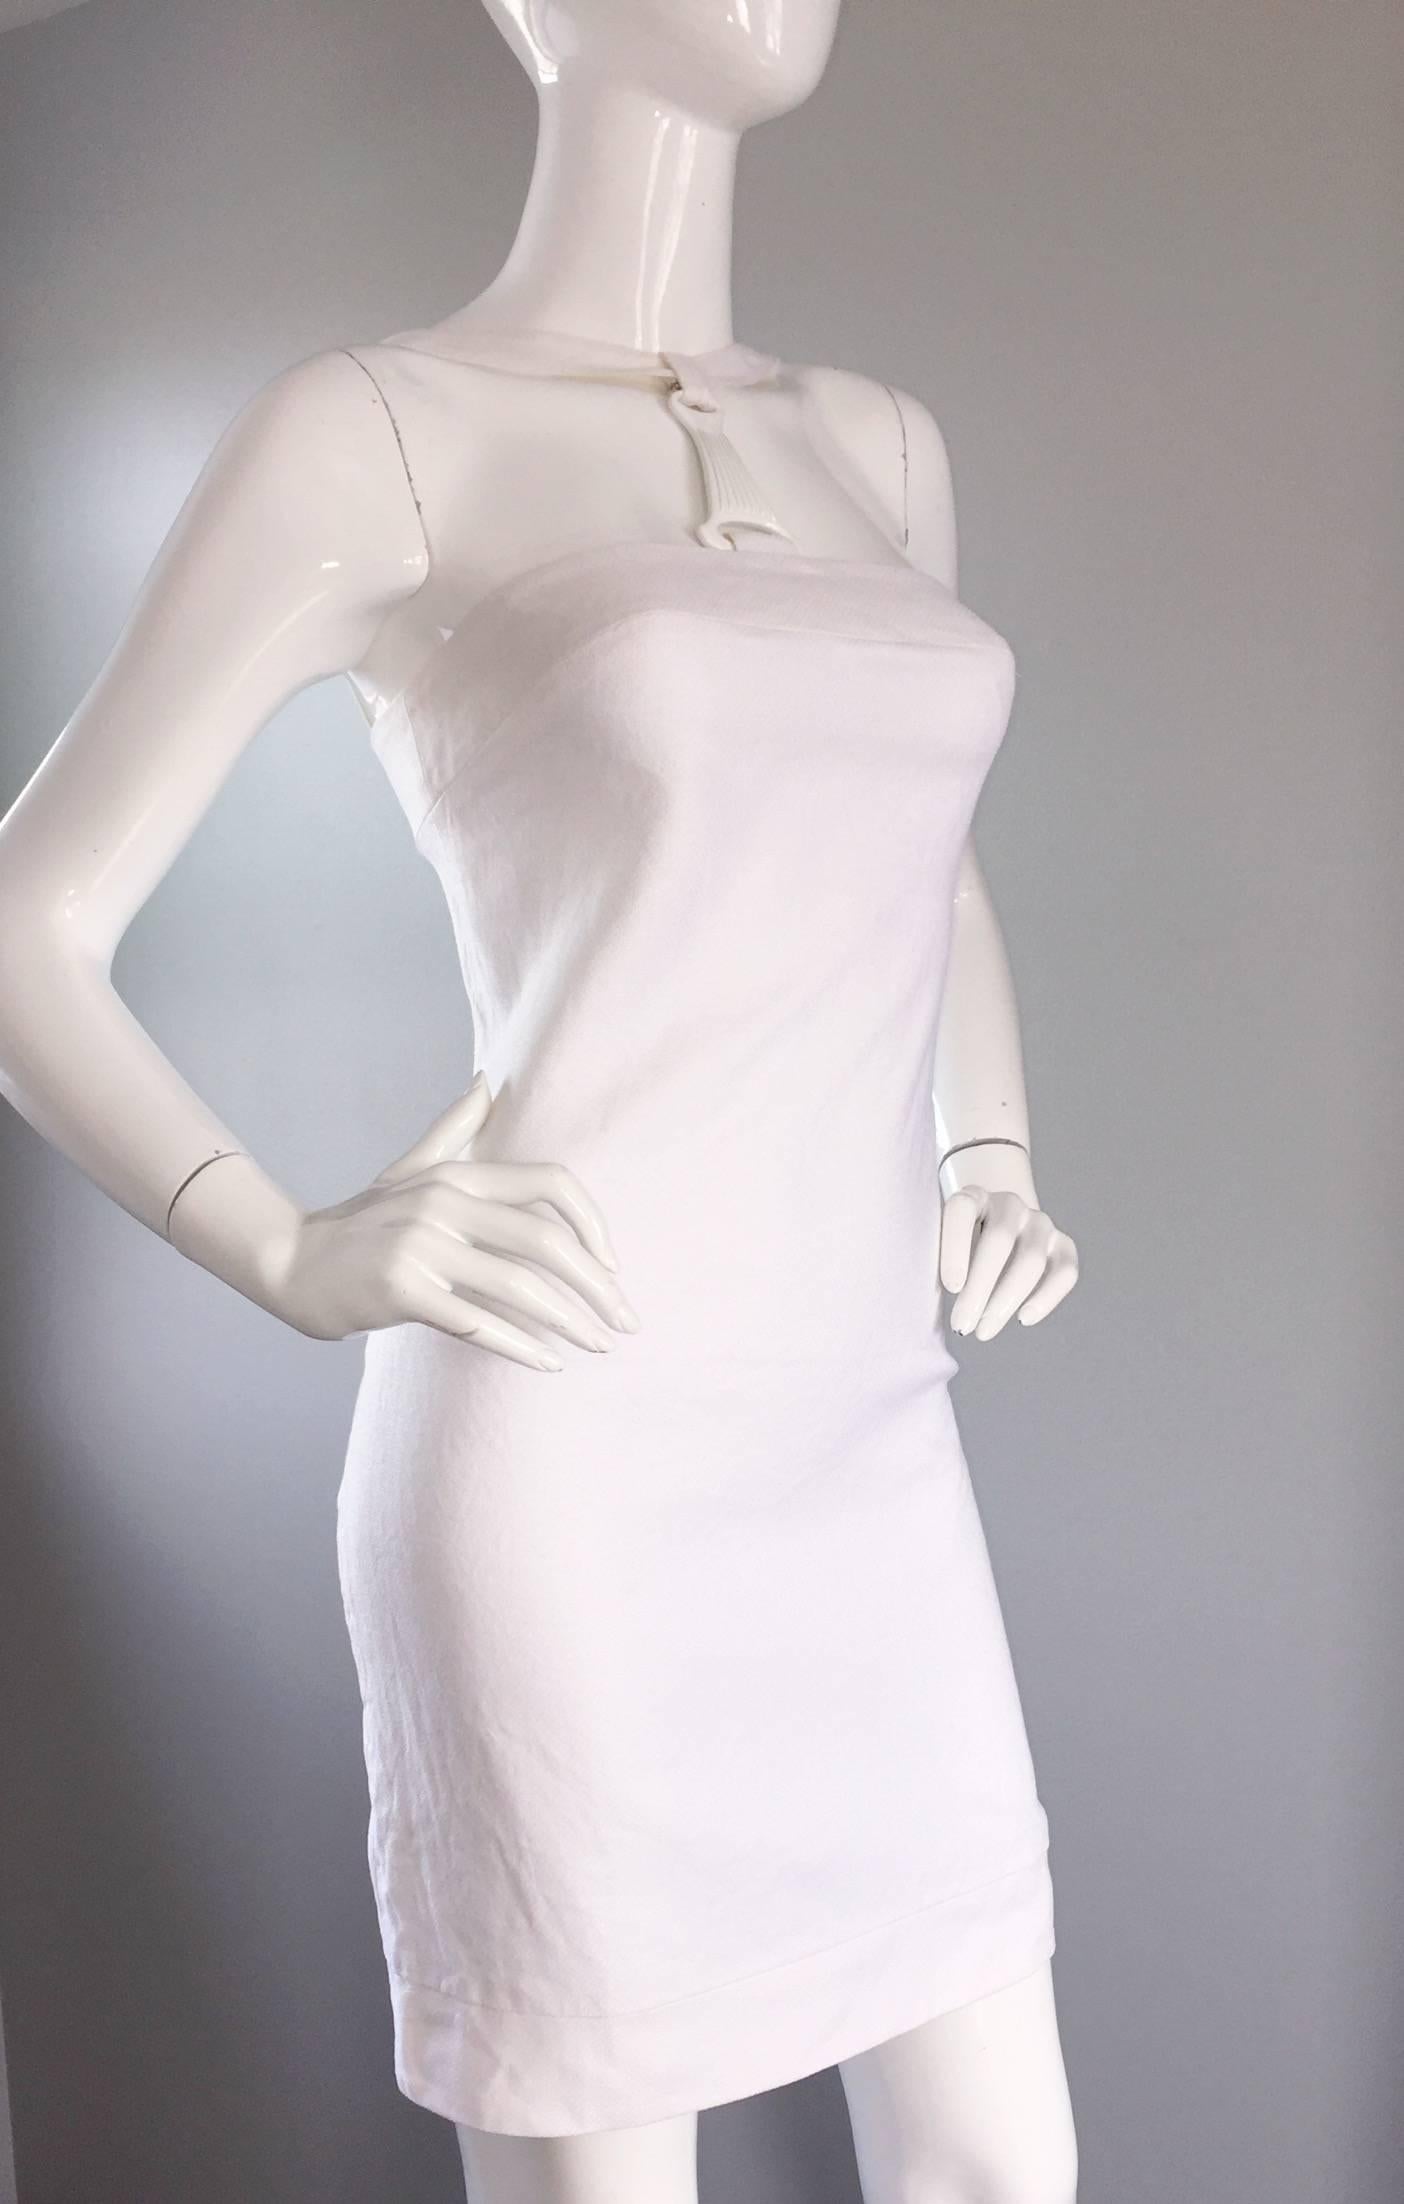 Rare 2000s Gianni Versace White Bondage BodyCon Vintage Dress w/ Medusa Harness In Excellent Condition For Sale In San Diego, CA